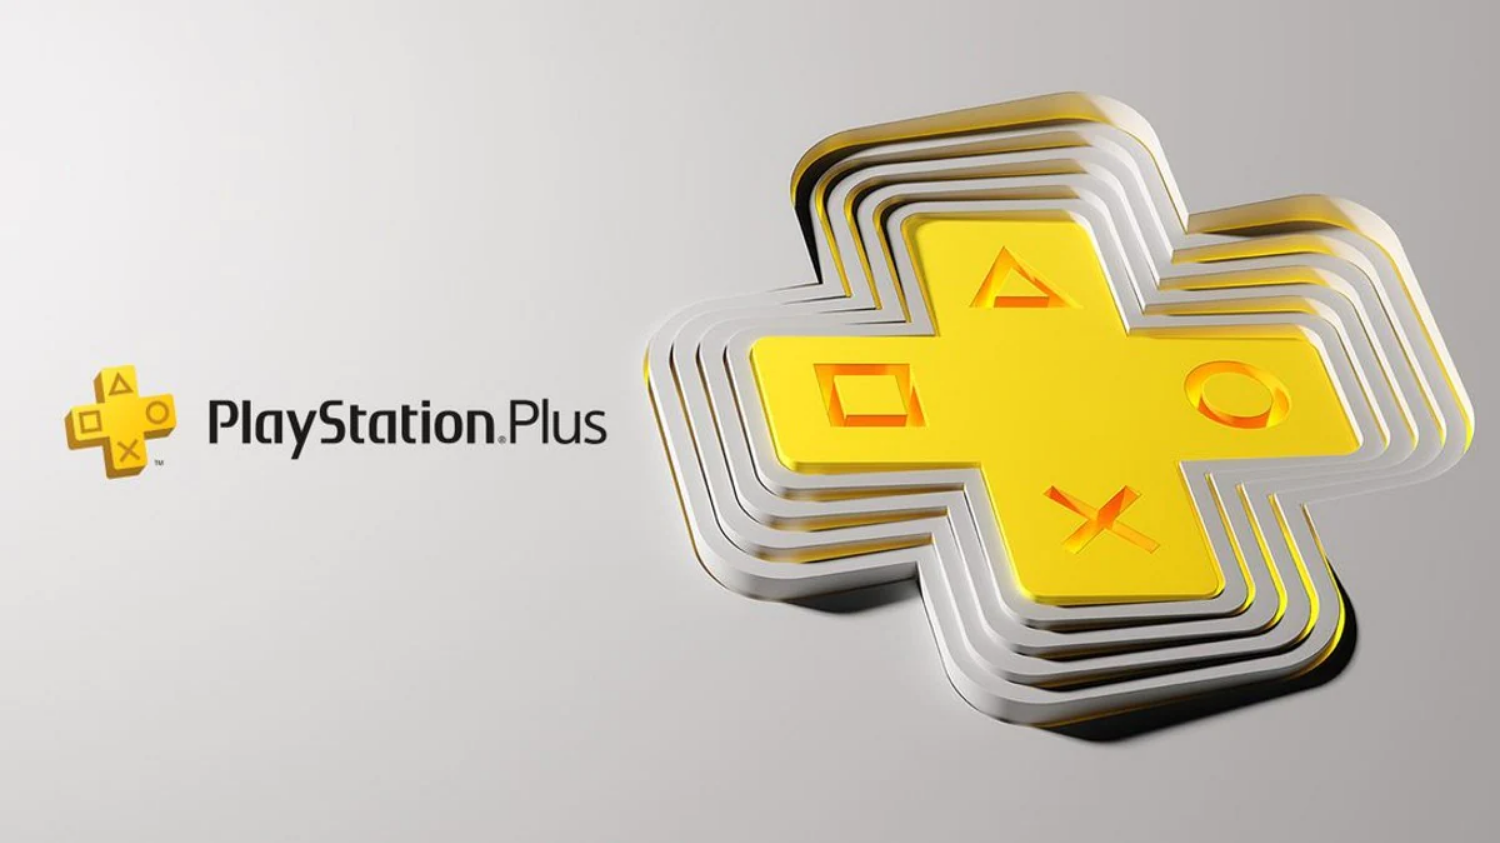 New Playstation Plus announced